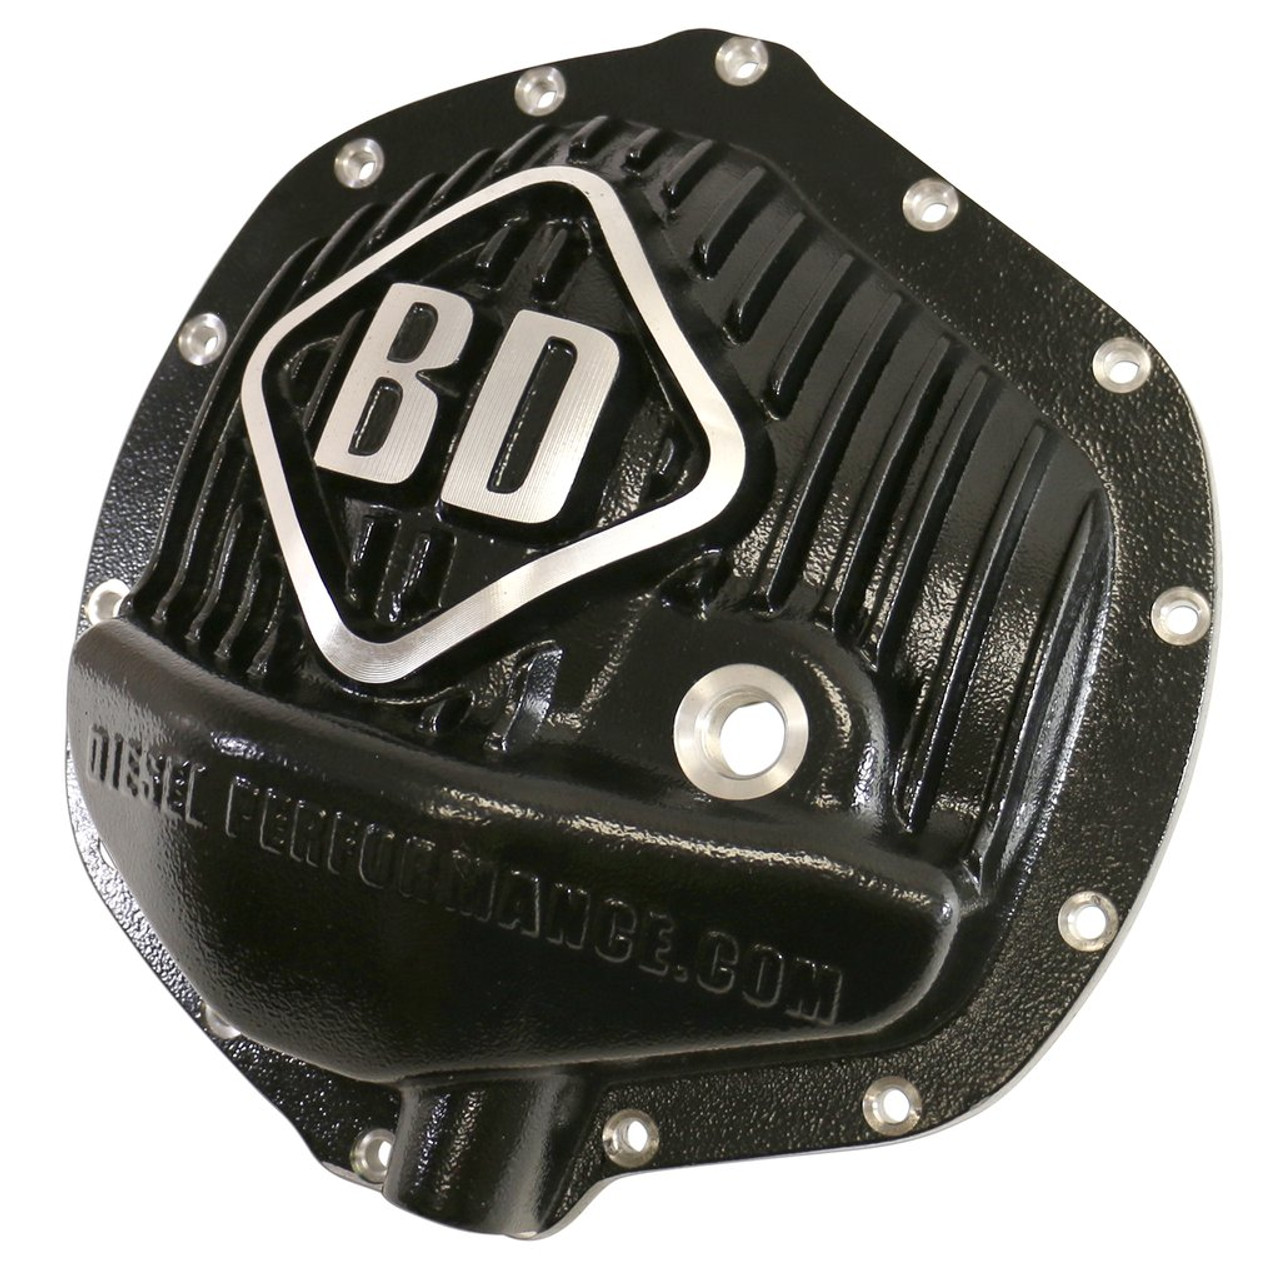 Differential Cover, Rear - AA 14-11.5 - Dodge 2003-2015 / Chevy 2001-2015